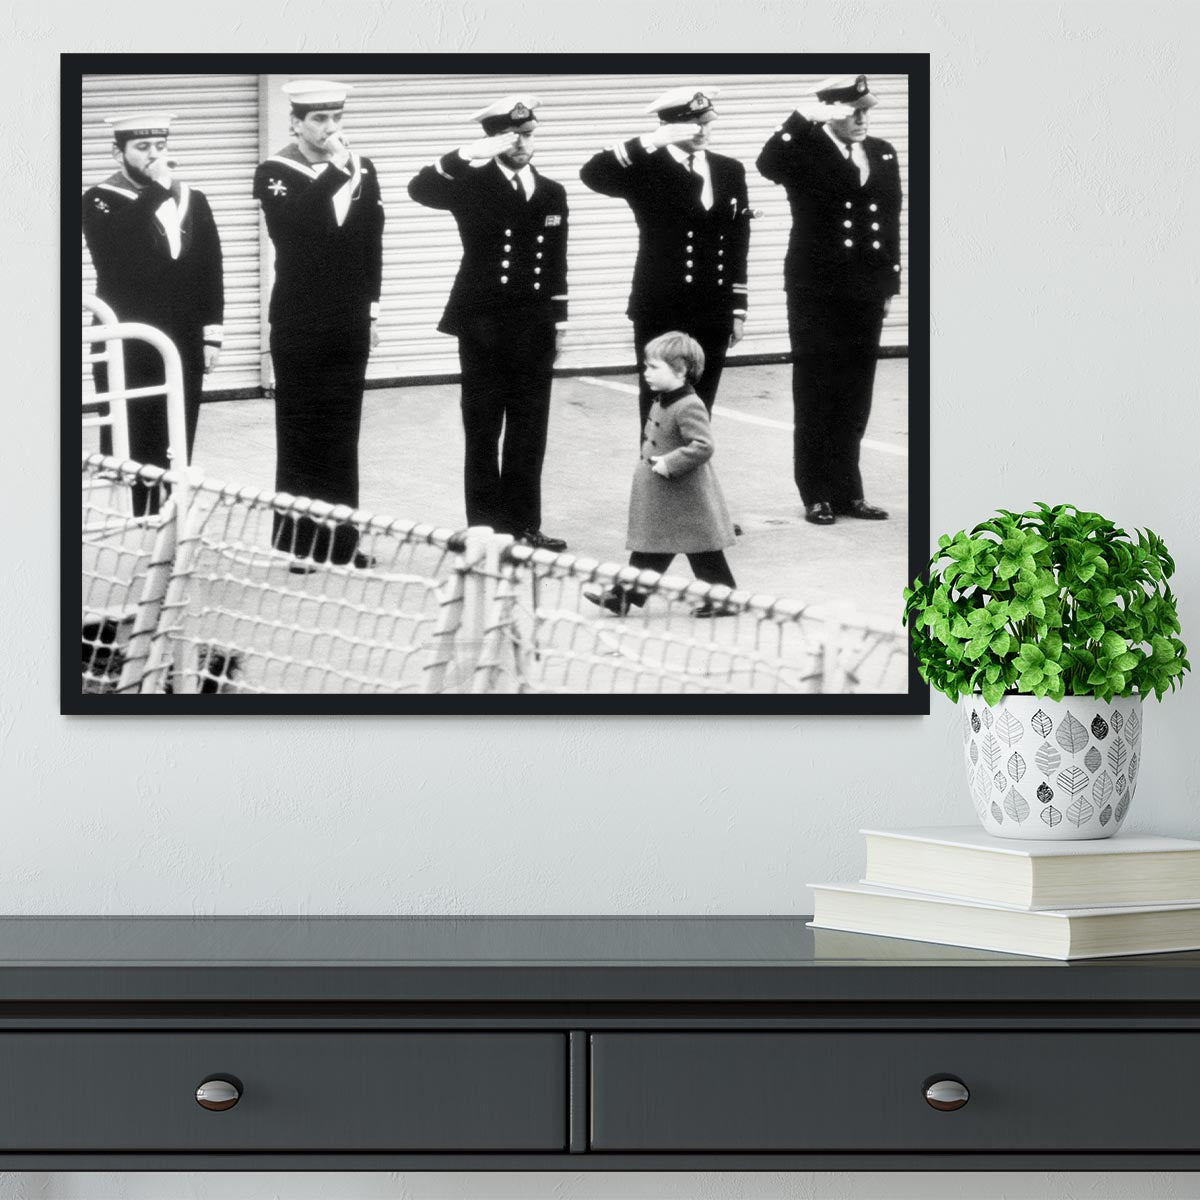 Prince William visiting the Royal Navy as a small child Framed Print - Canvas Art Rocks - 2